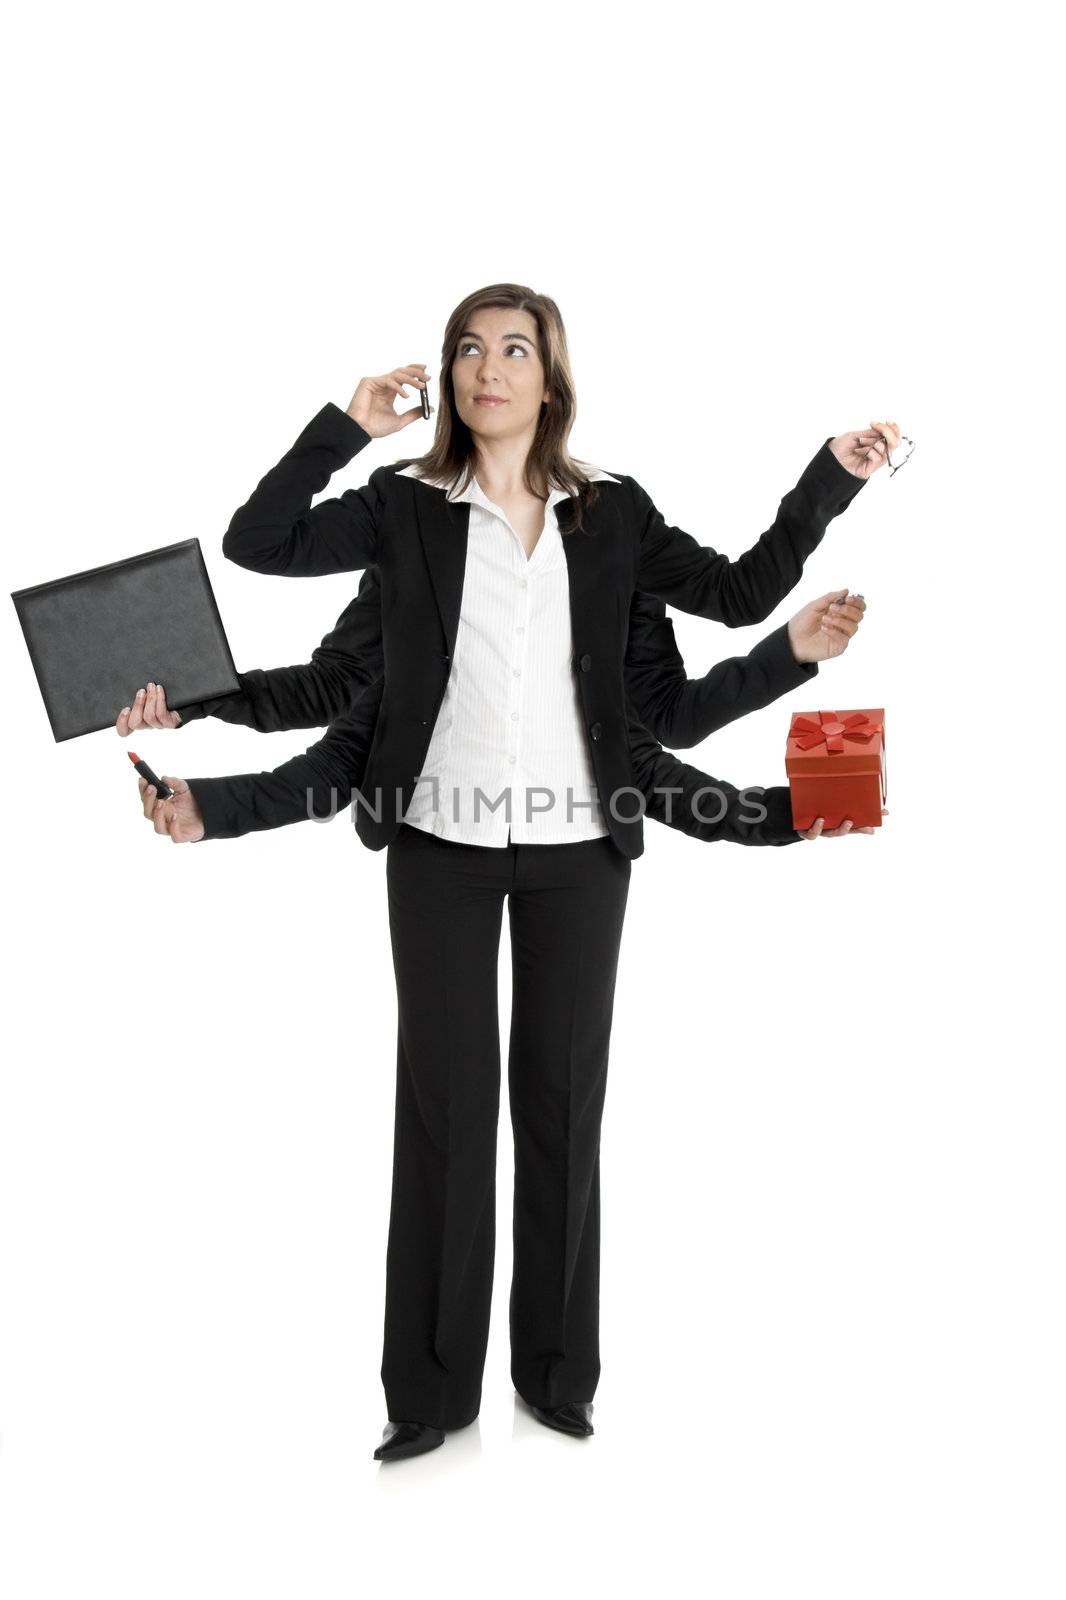 
Beautiful business woman with six arms, making a call and holding, glasses, briefcase, pen, lipstick and a red box
